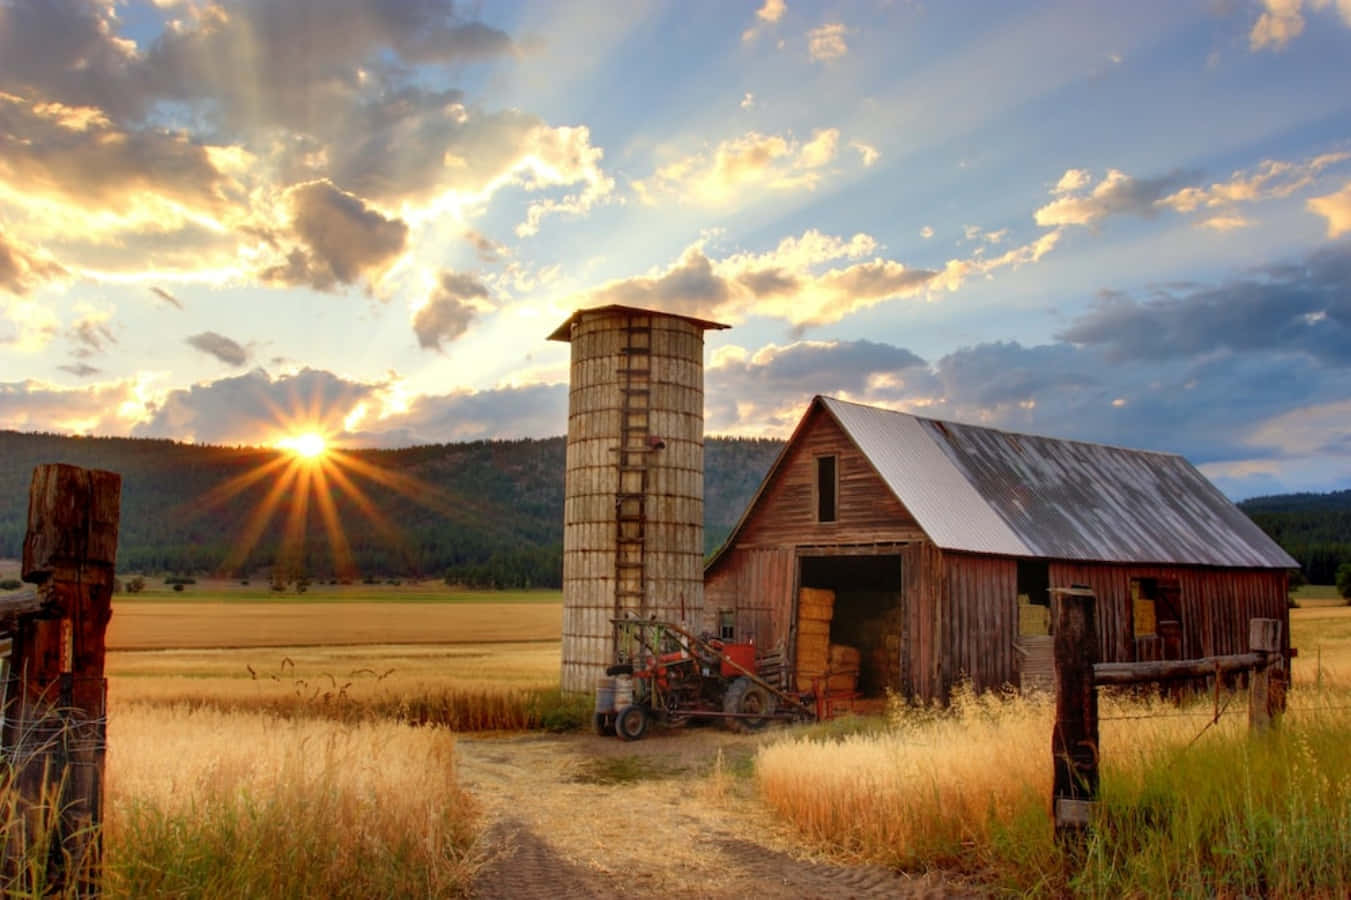 A Picturesque View of an Old Farm